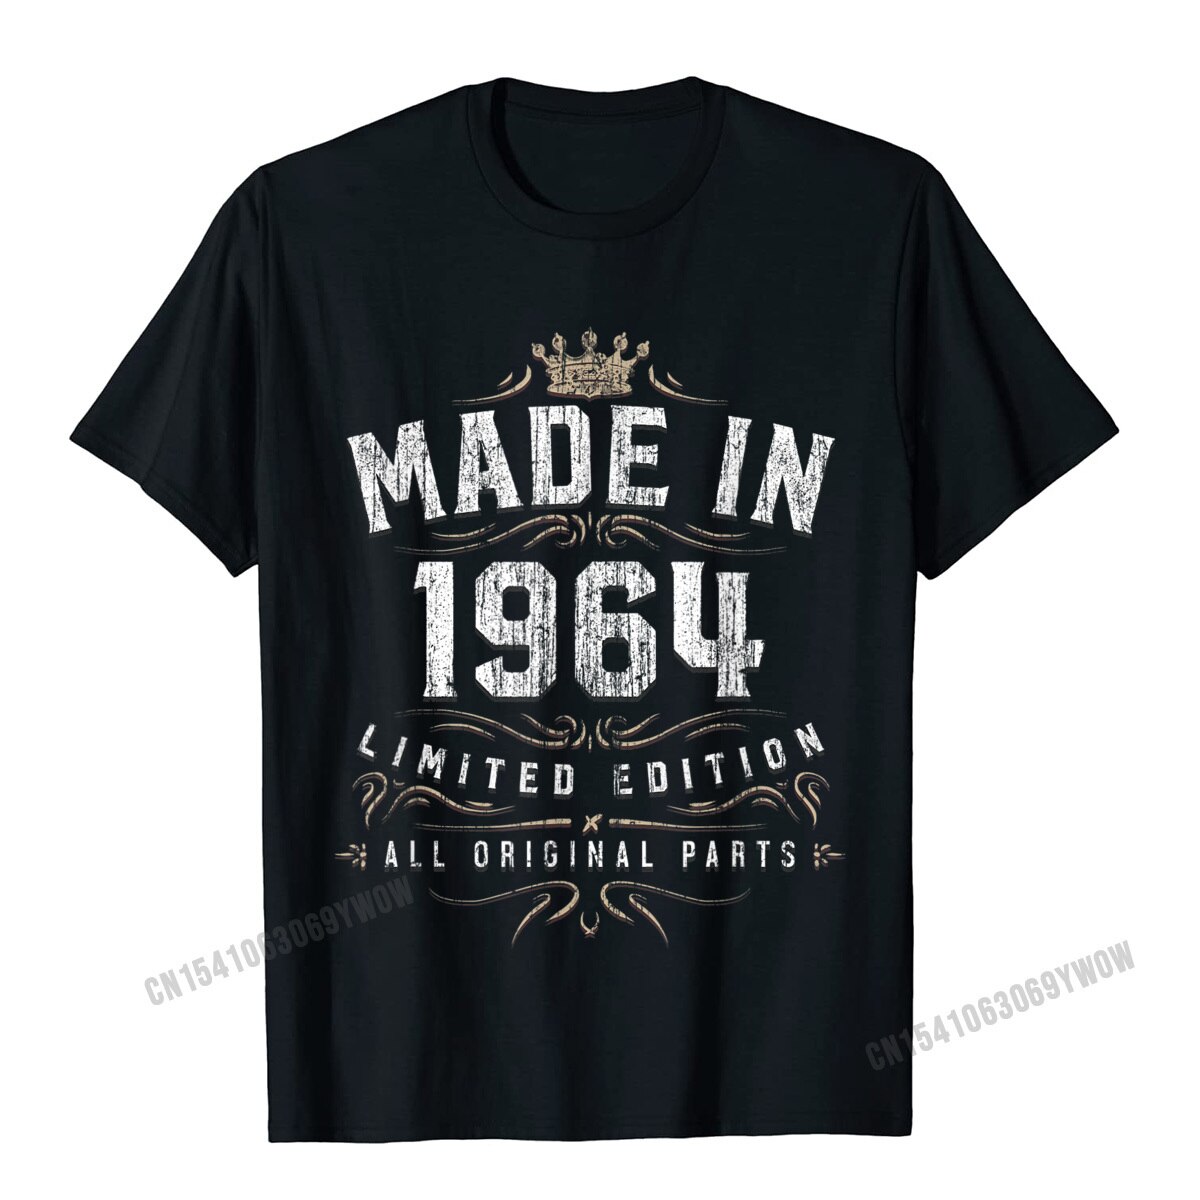 Camisa Family T Shirt for Men Cotton Fabric Father Day Tops Shirt Simple Style Tops & Tees Short Sleeve Prevalent Round Collar Made In 1964 Shirt Birthday 55 Limited Edition Image Gifts__994 black